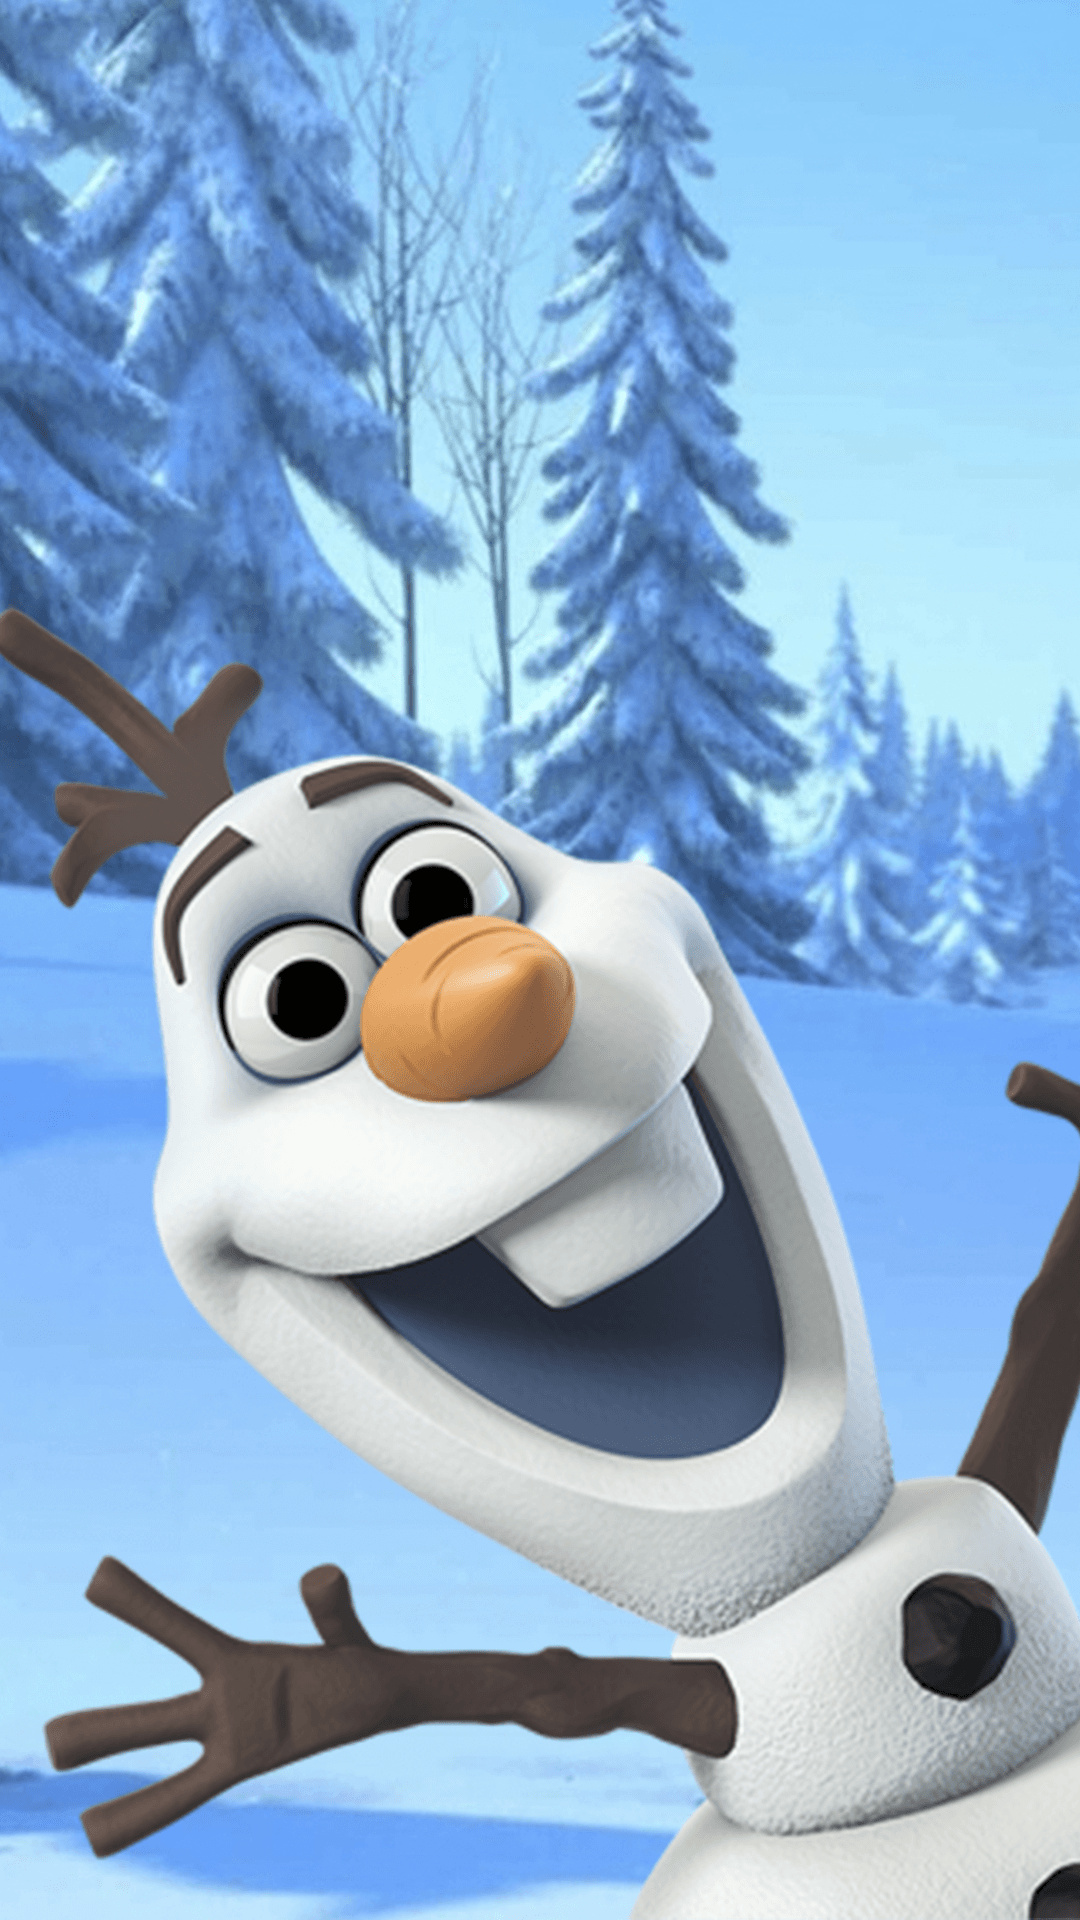 Olaf, Frozen magic, Playful snowman, Whimsical personality, 1080x1920 Full HD Phone